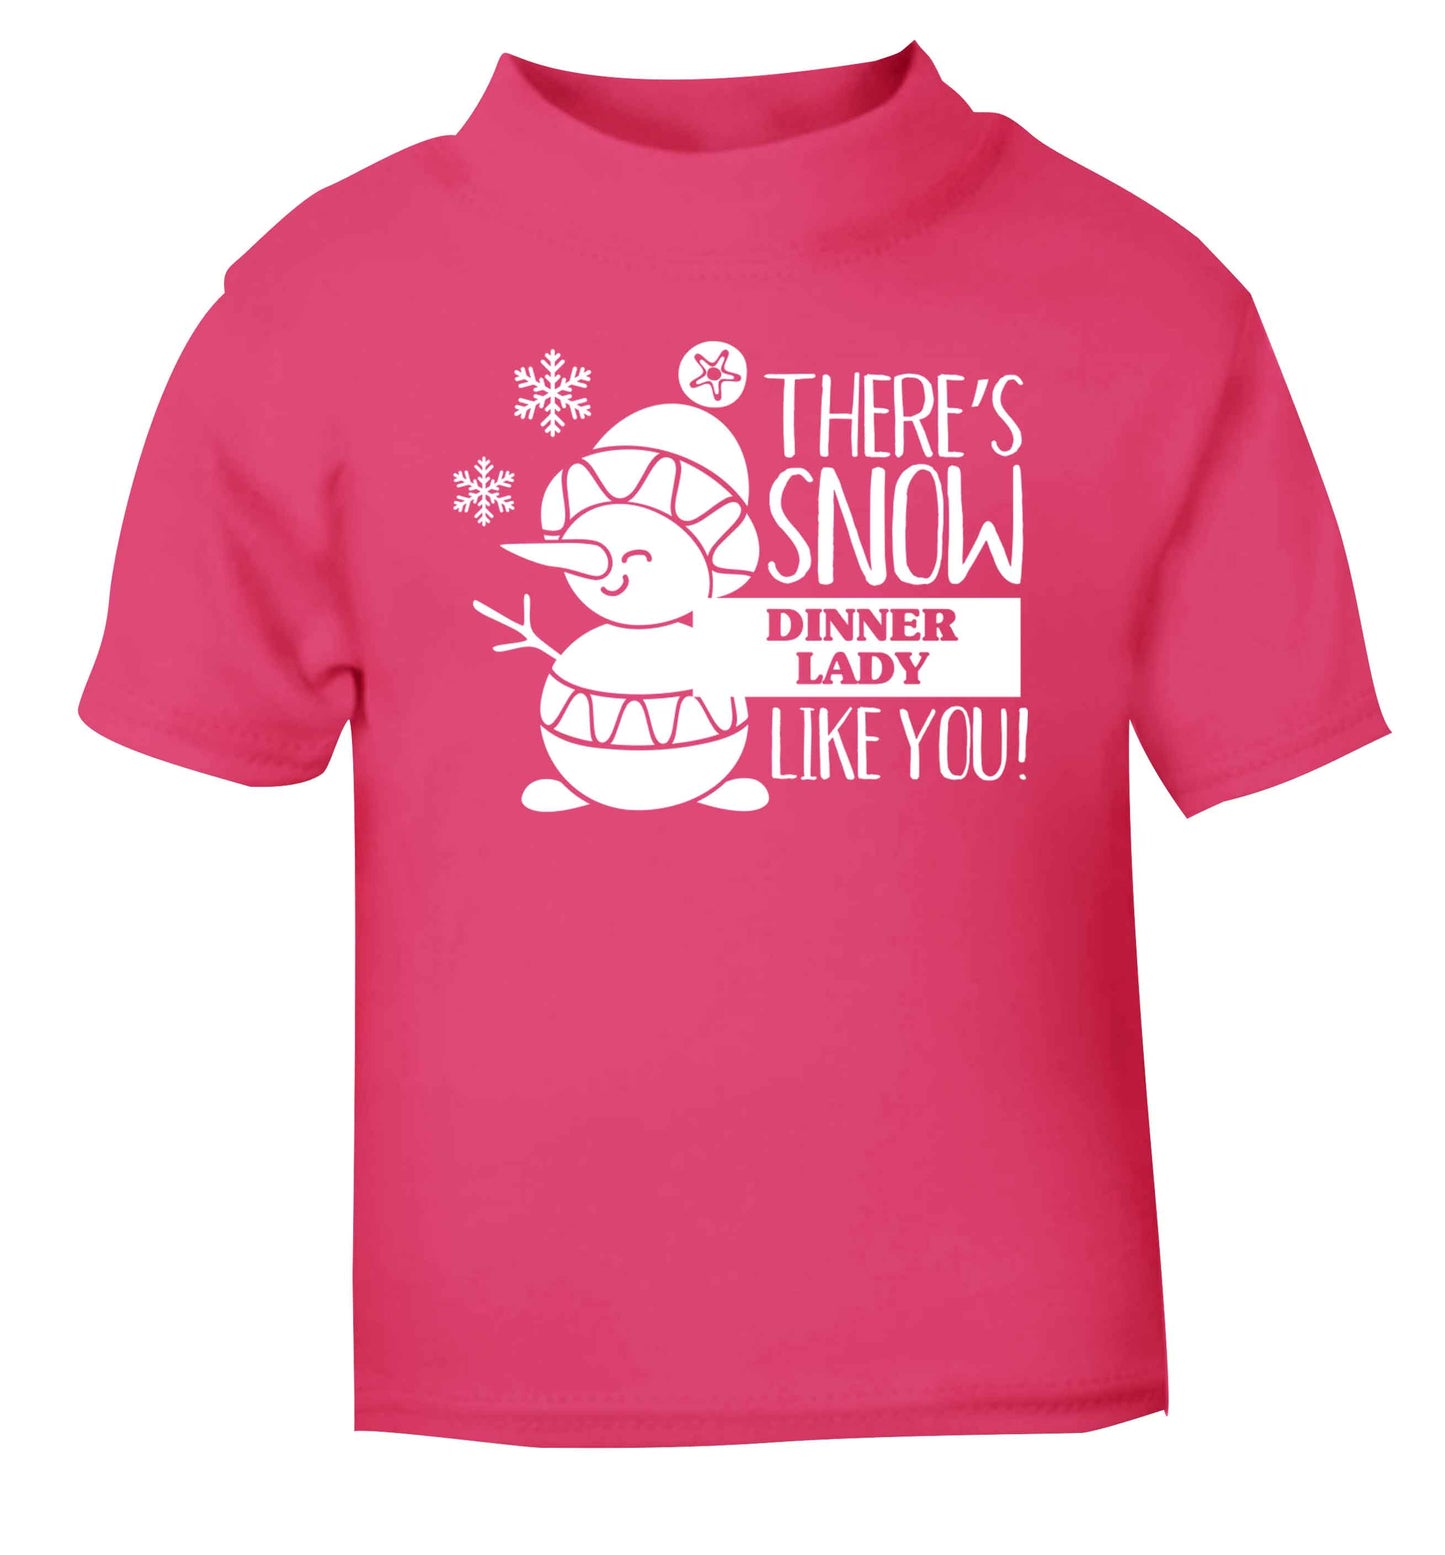 There's snow dinner lady like you pink baby toddler Tshirt 2 Years